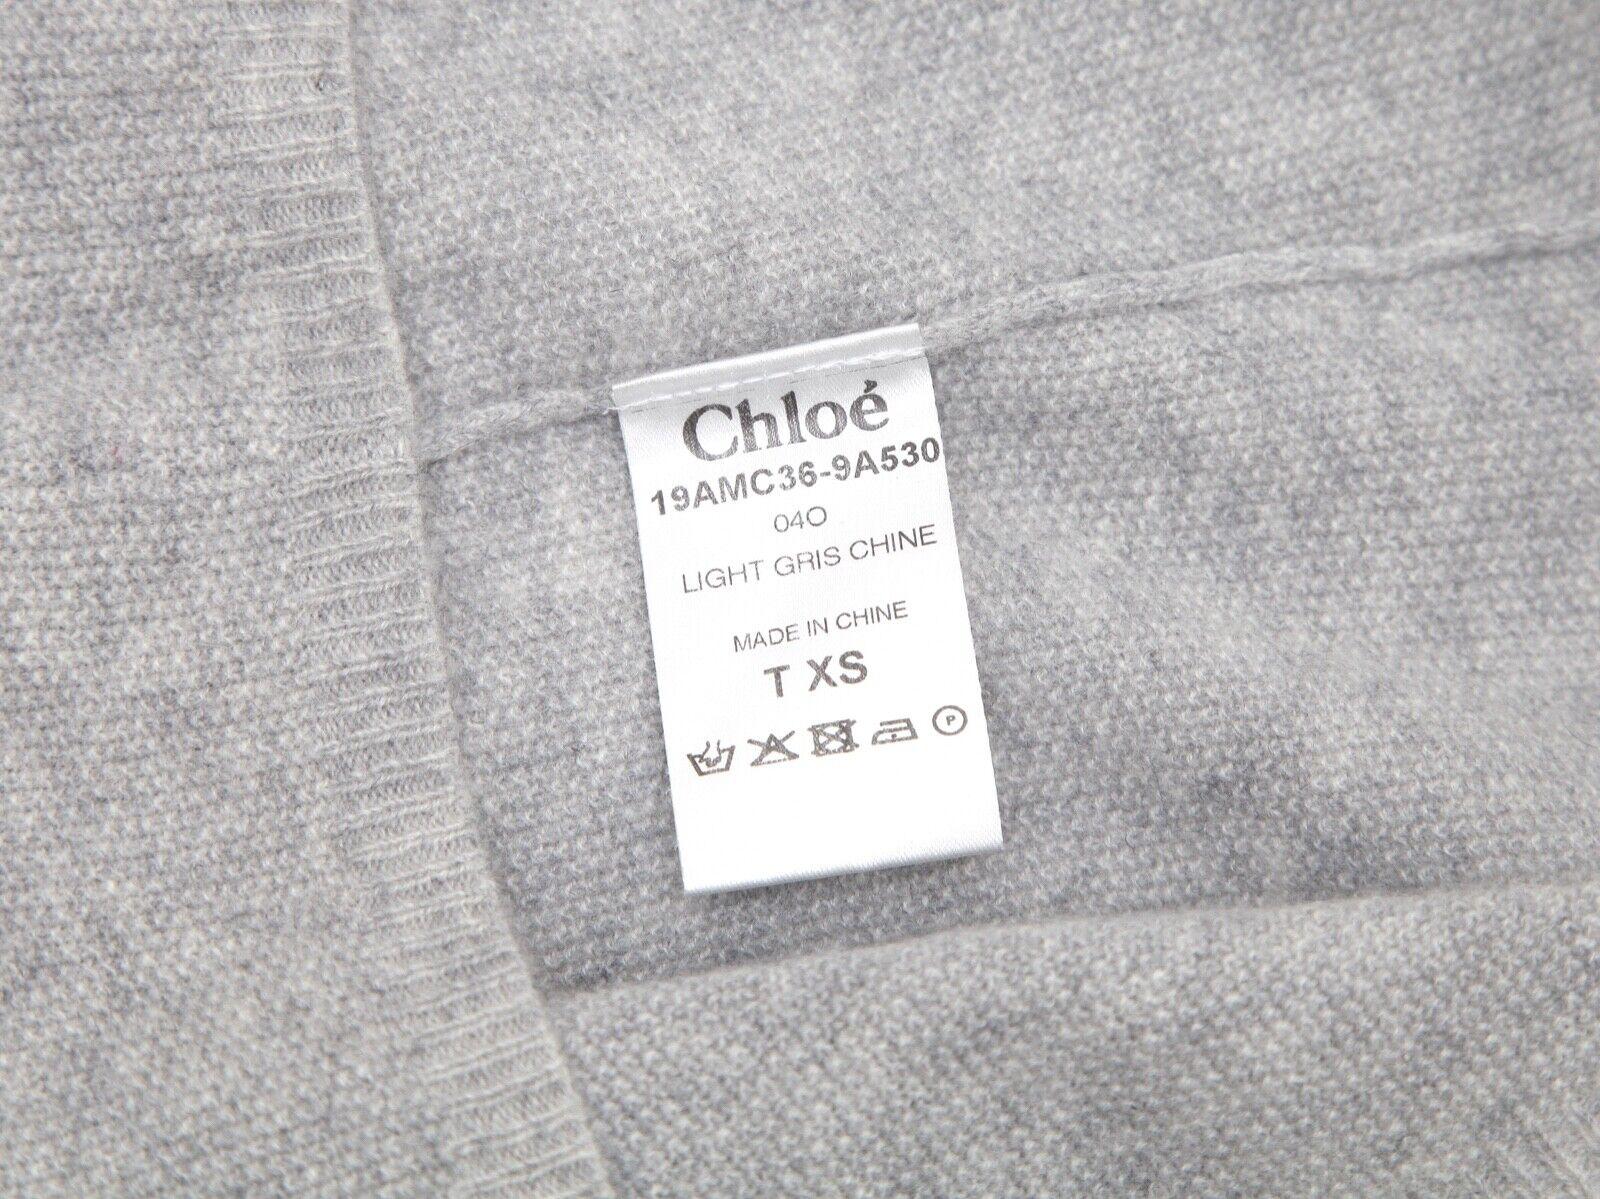 CHLOE Grey Cardigan Sweater Knit Cashmere Long Sleeve Snap Closure Sz XS For Sale 4